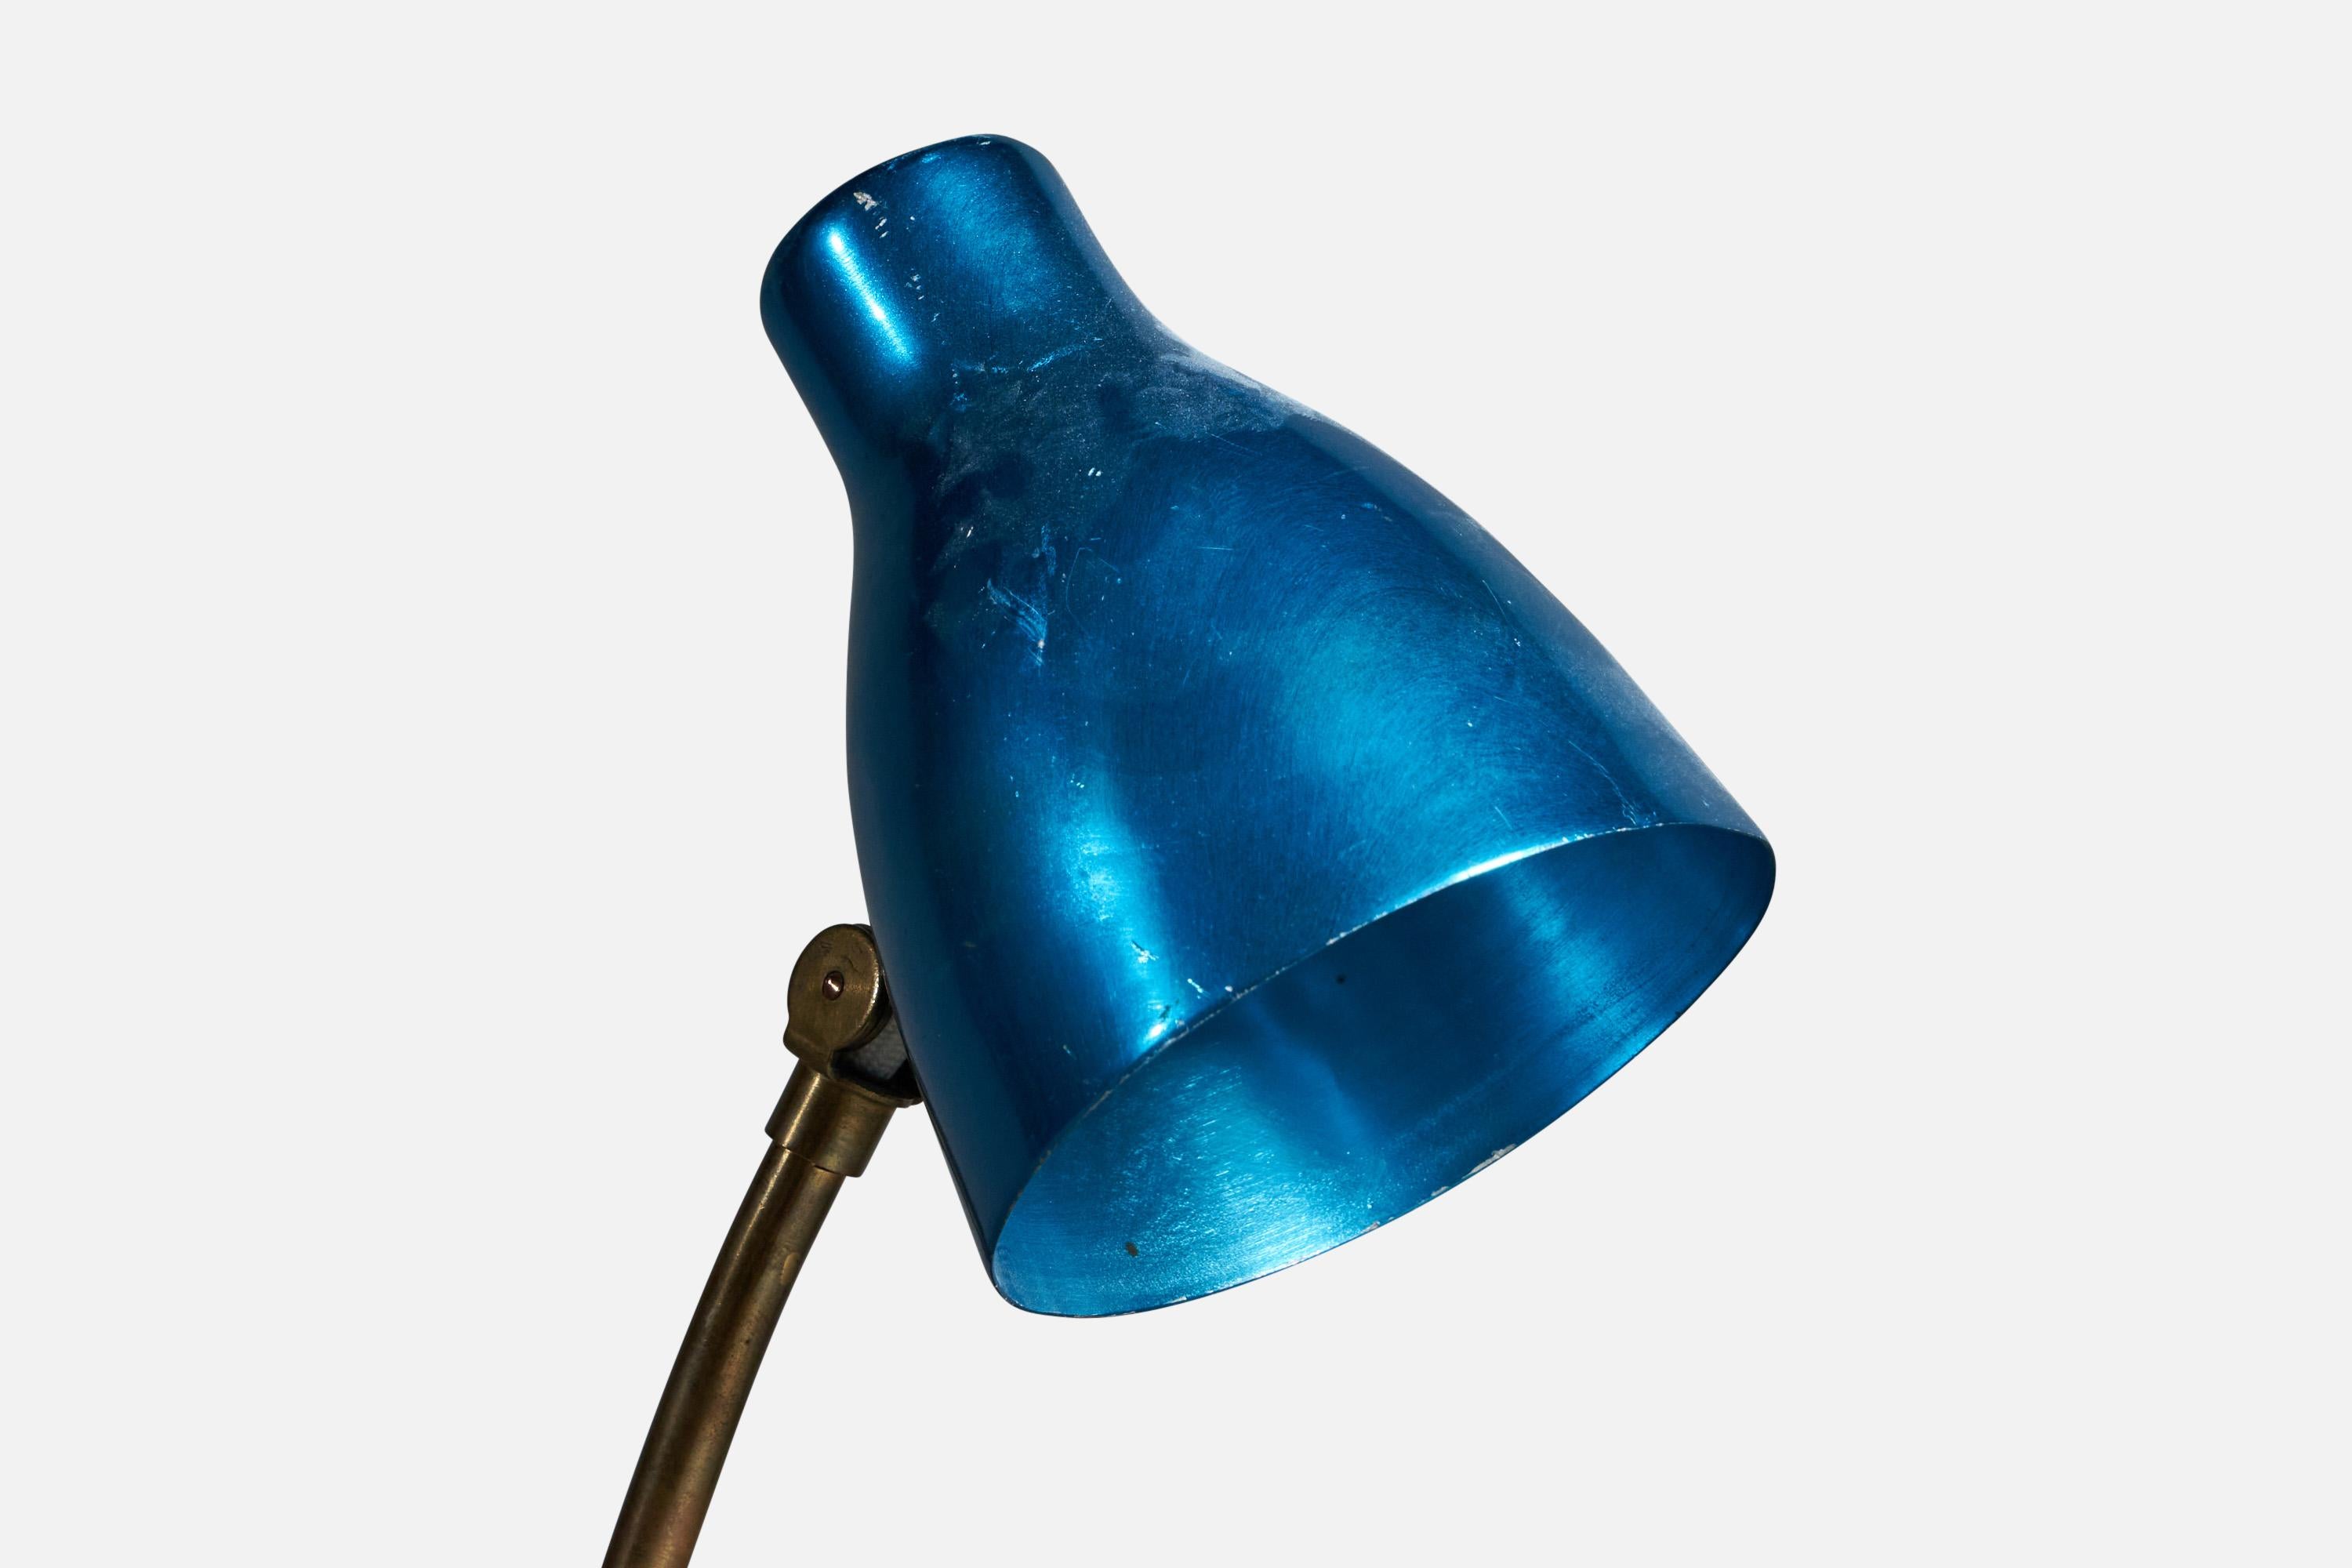 A rare modernist table lamp by Finnish producer, Itsu. The base features molded and bent brass wrapped in natural leather. The adjustable screen in anodized aluminum.

Very similar model illustrated in the manufacturer's catalog. The blue galvanized